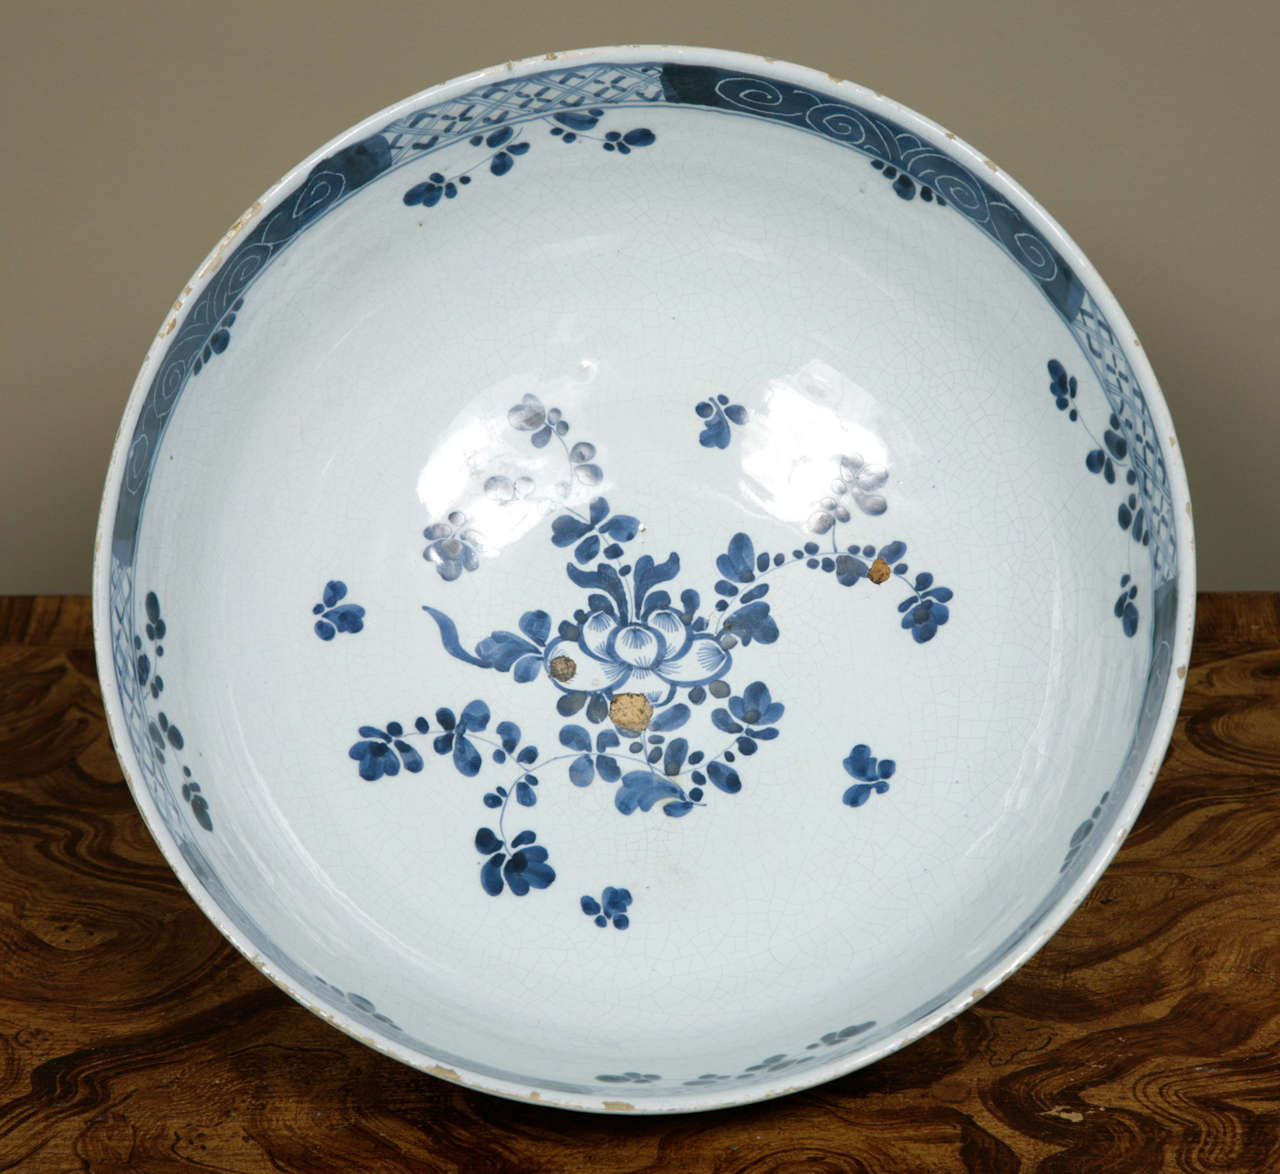 A good sized mid 18th century English Delft, (probably Mortlake), punch bowl. This large bowl, is freely painted inside and out with rocks, trees, oriental pavillions and sprays of flowers in the Chinese style. Condition, minor rim chips, some glaze